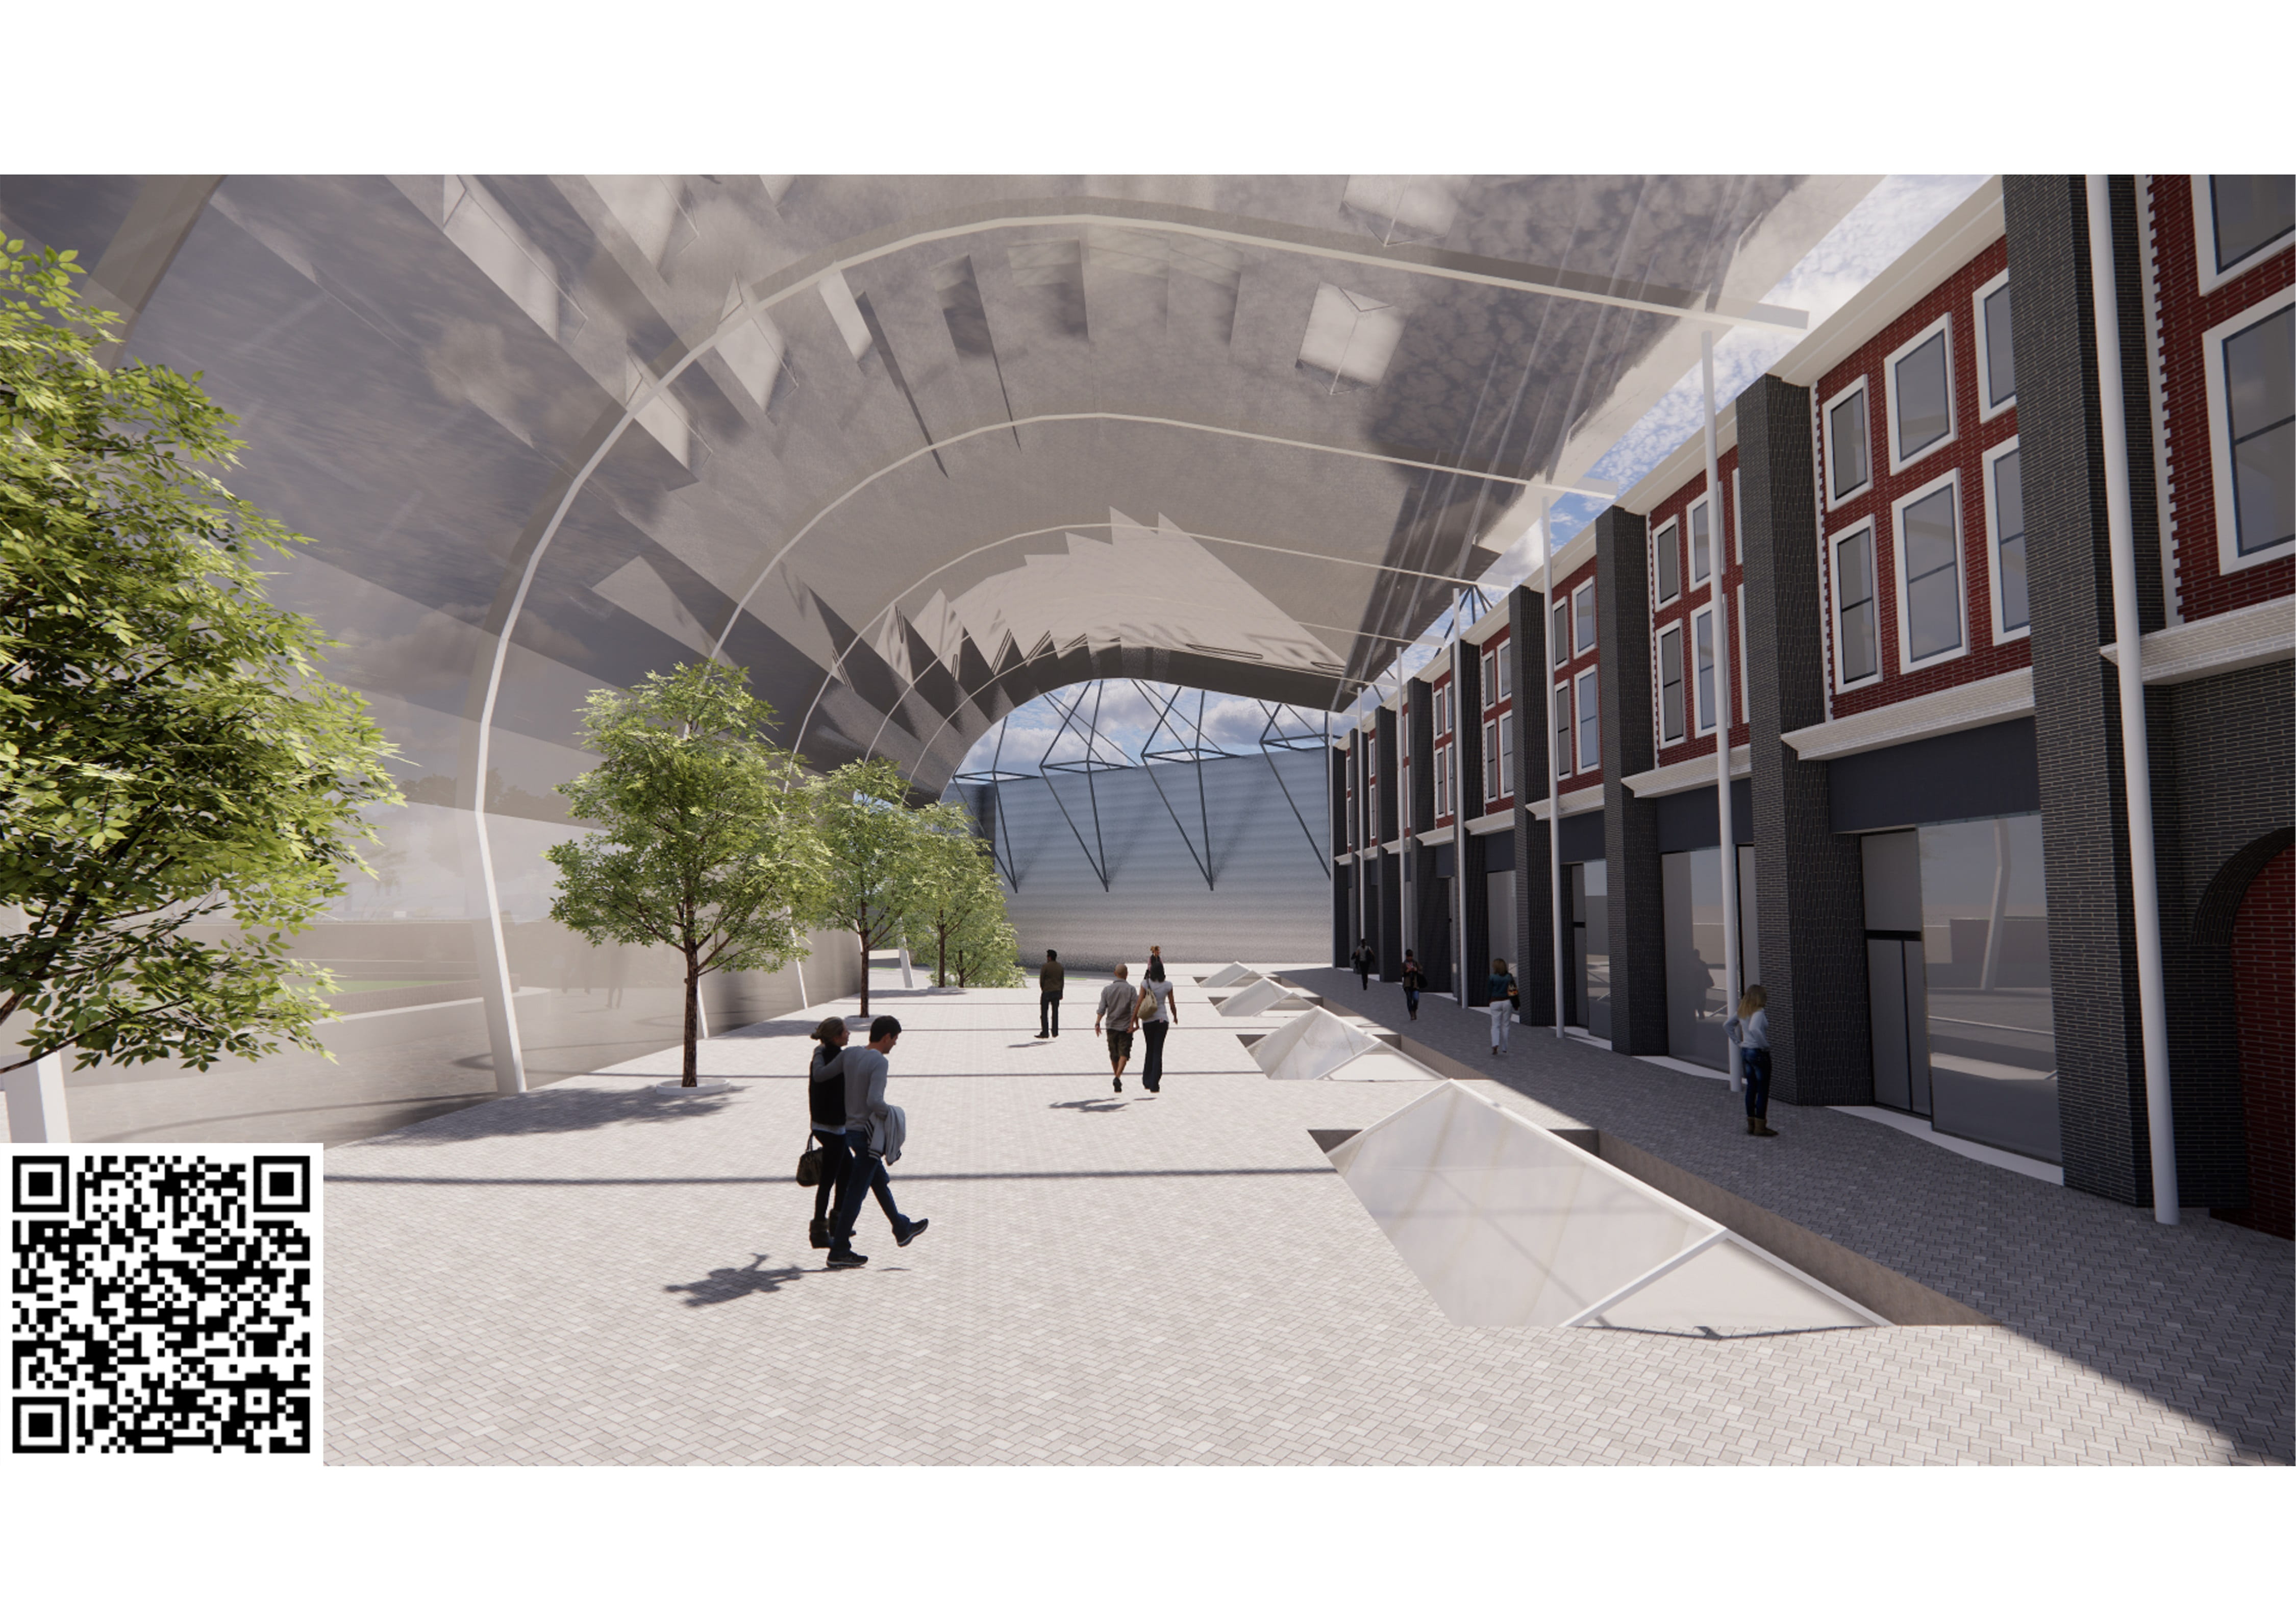 Interior render showing the glazed canopy and main facade of the Station Building Retail Block.